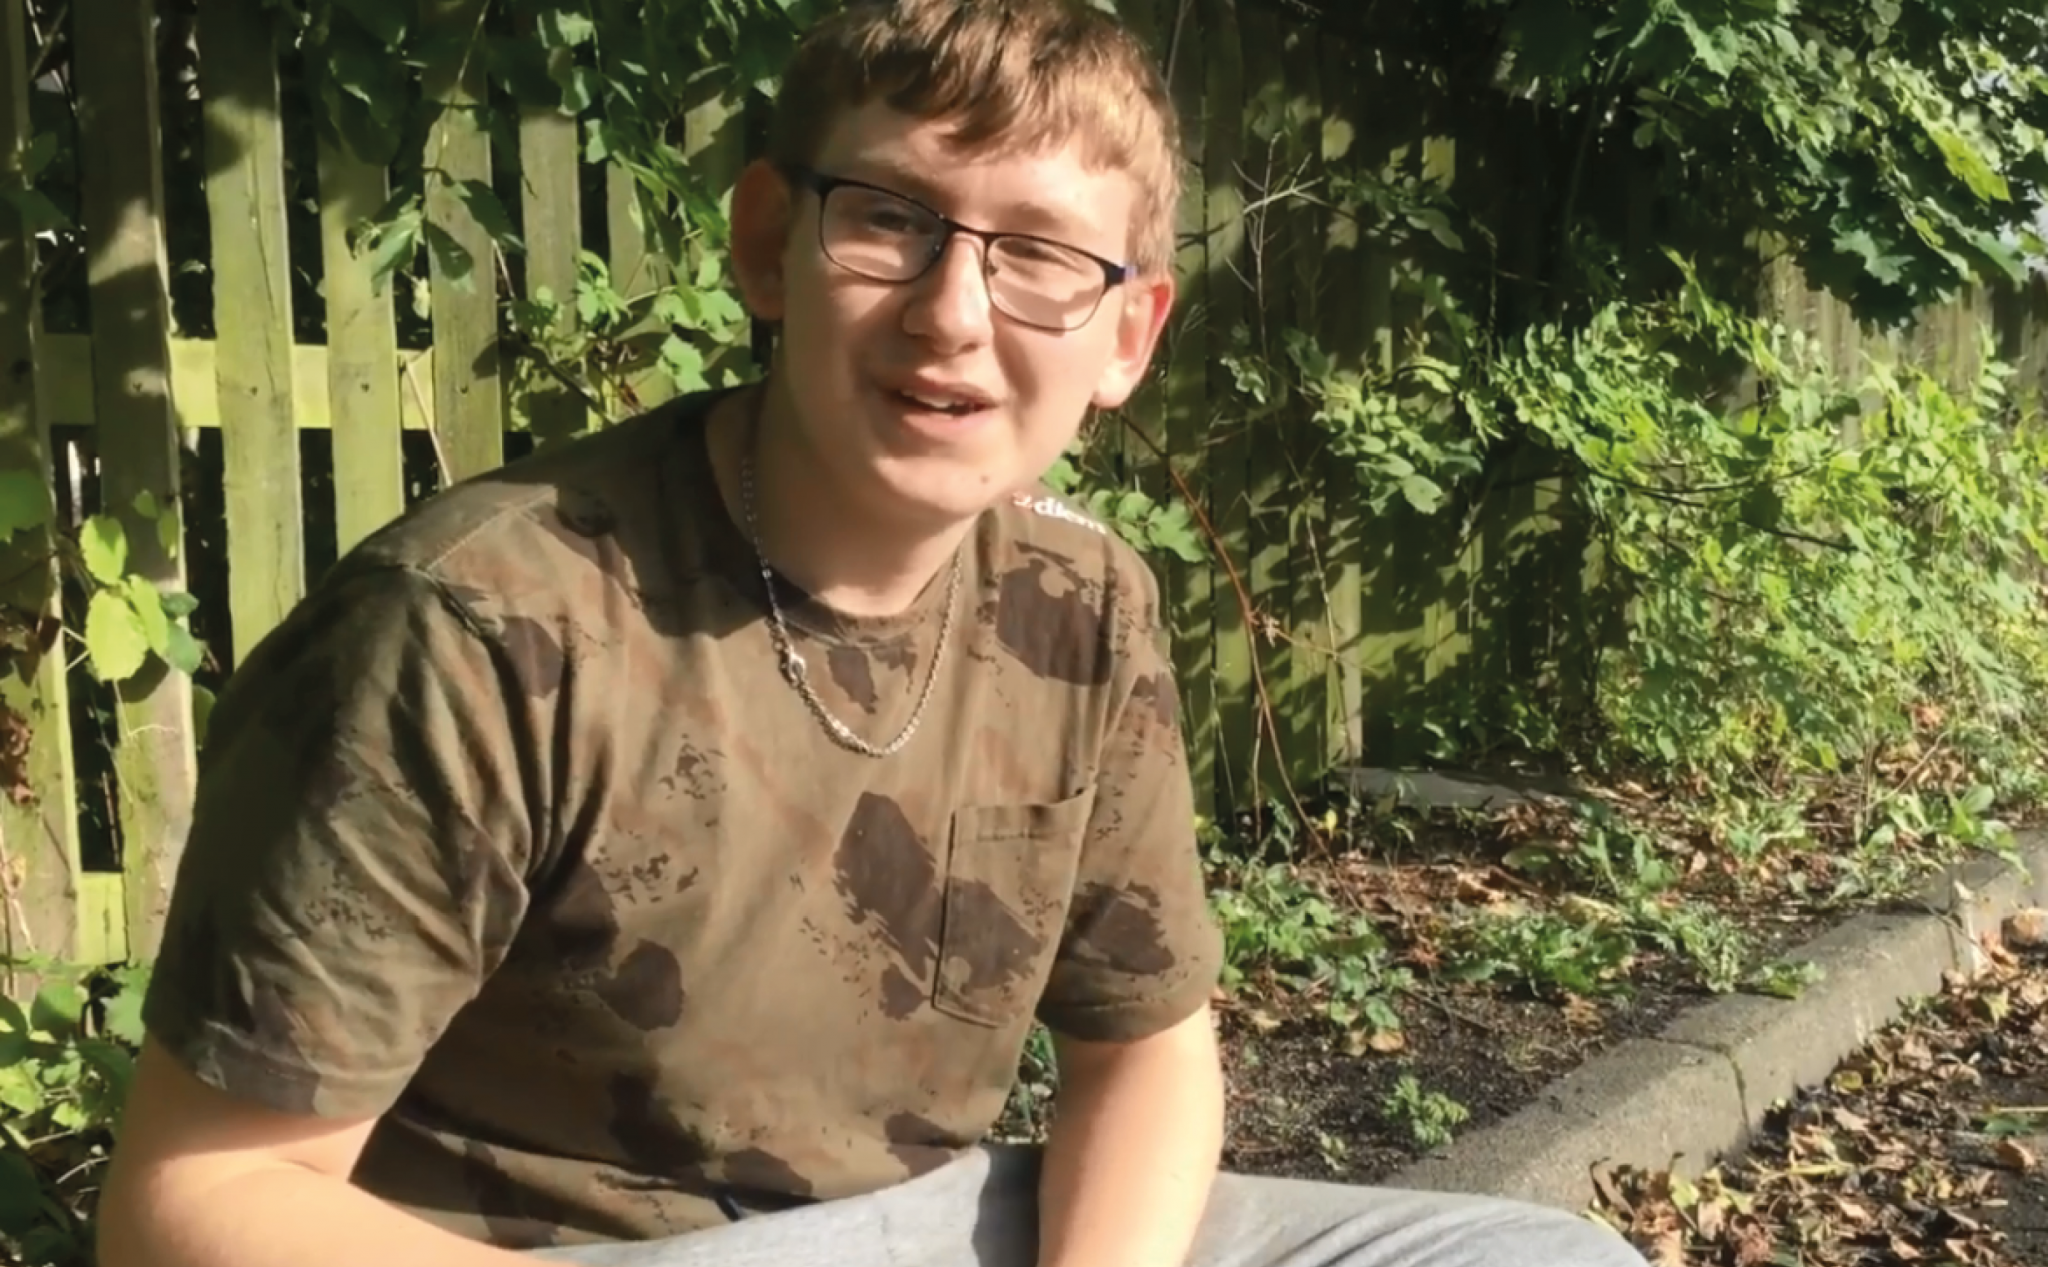 Kieran’s story: “They helped me get into college”